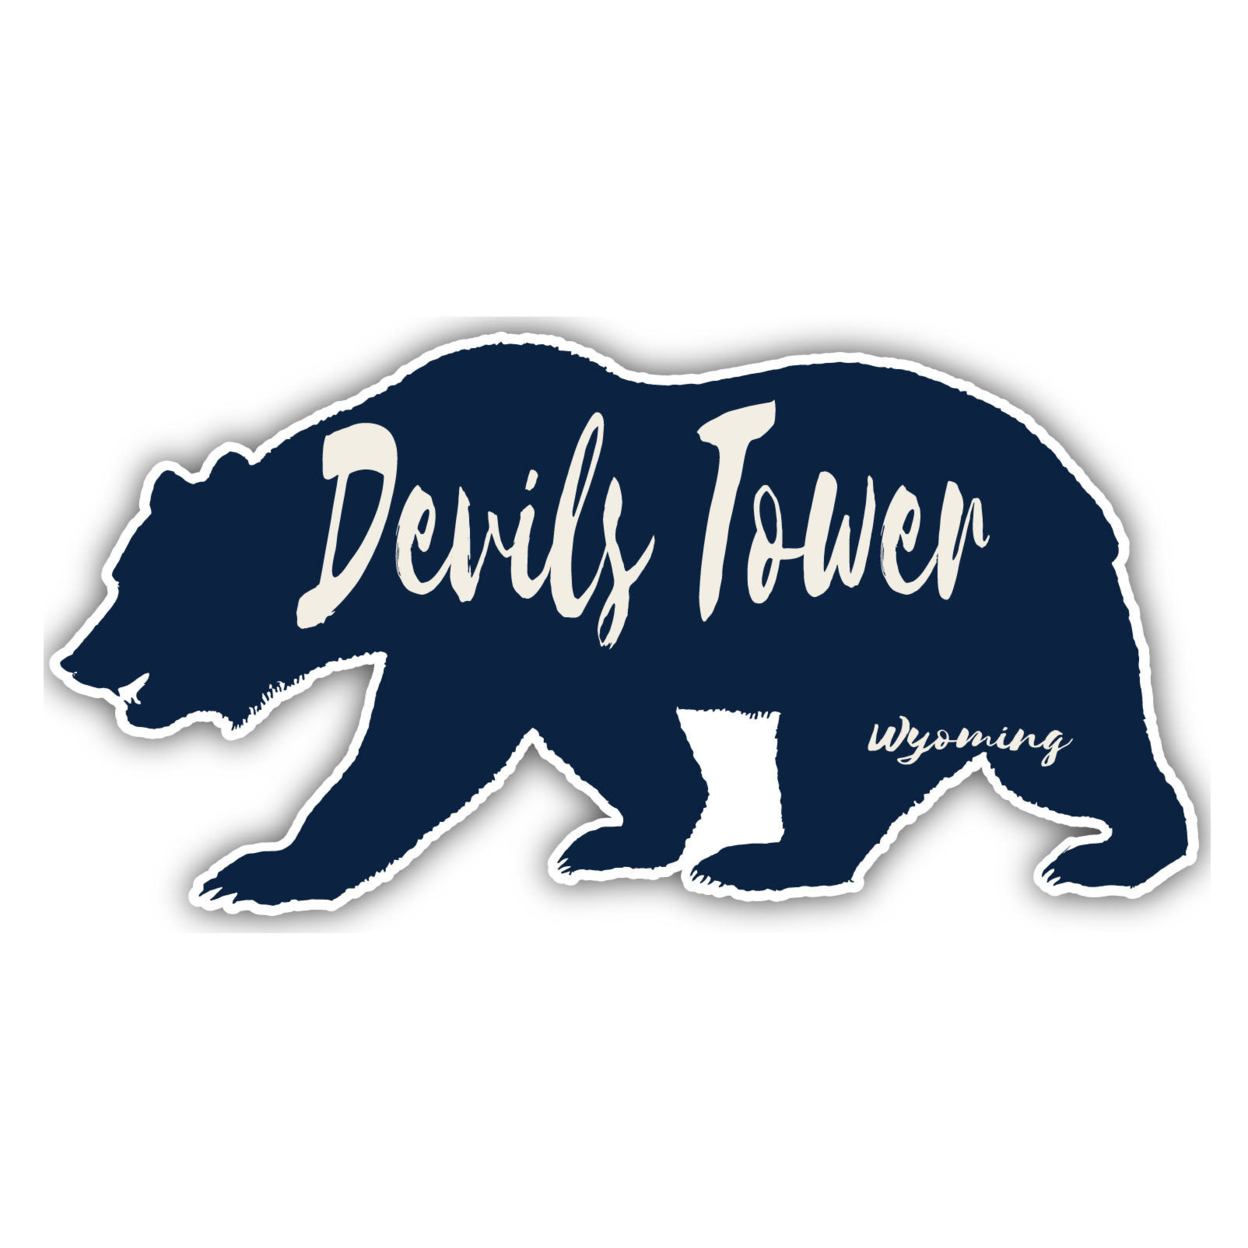 Devils Tower Wyoming Souvenir Decorative Stickers (Choose Theme And Size) - 4-Pack, 2-Inch, Bear